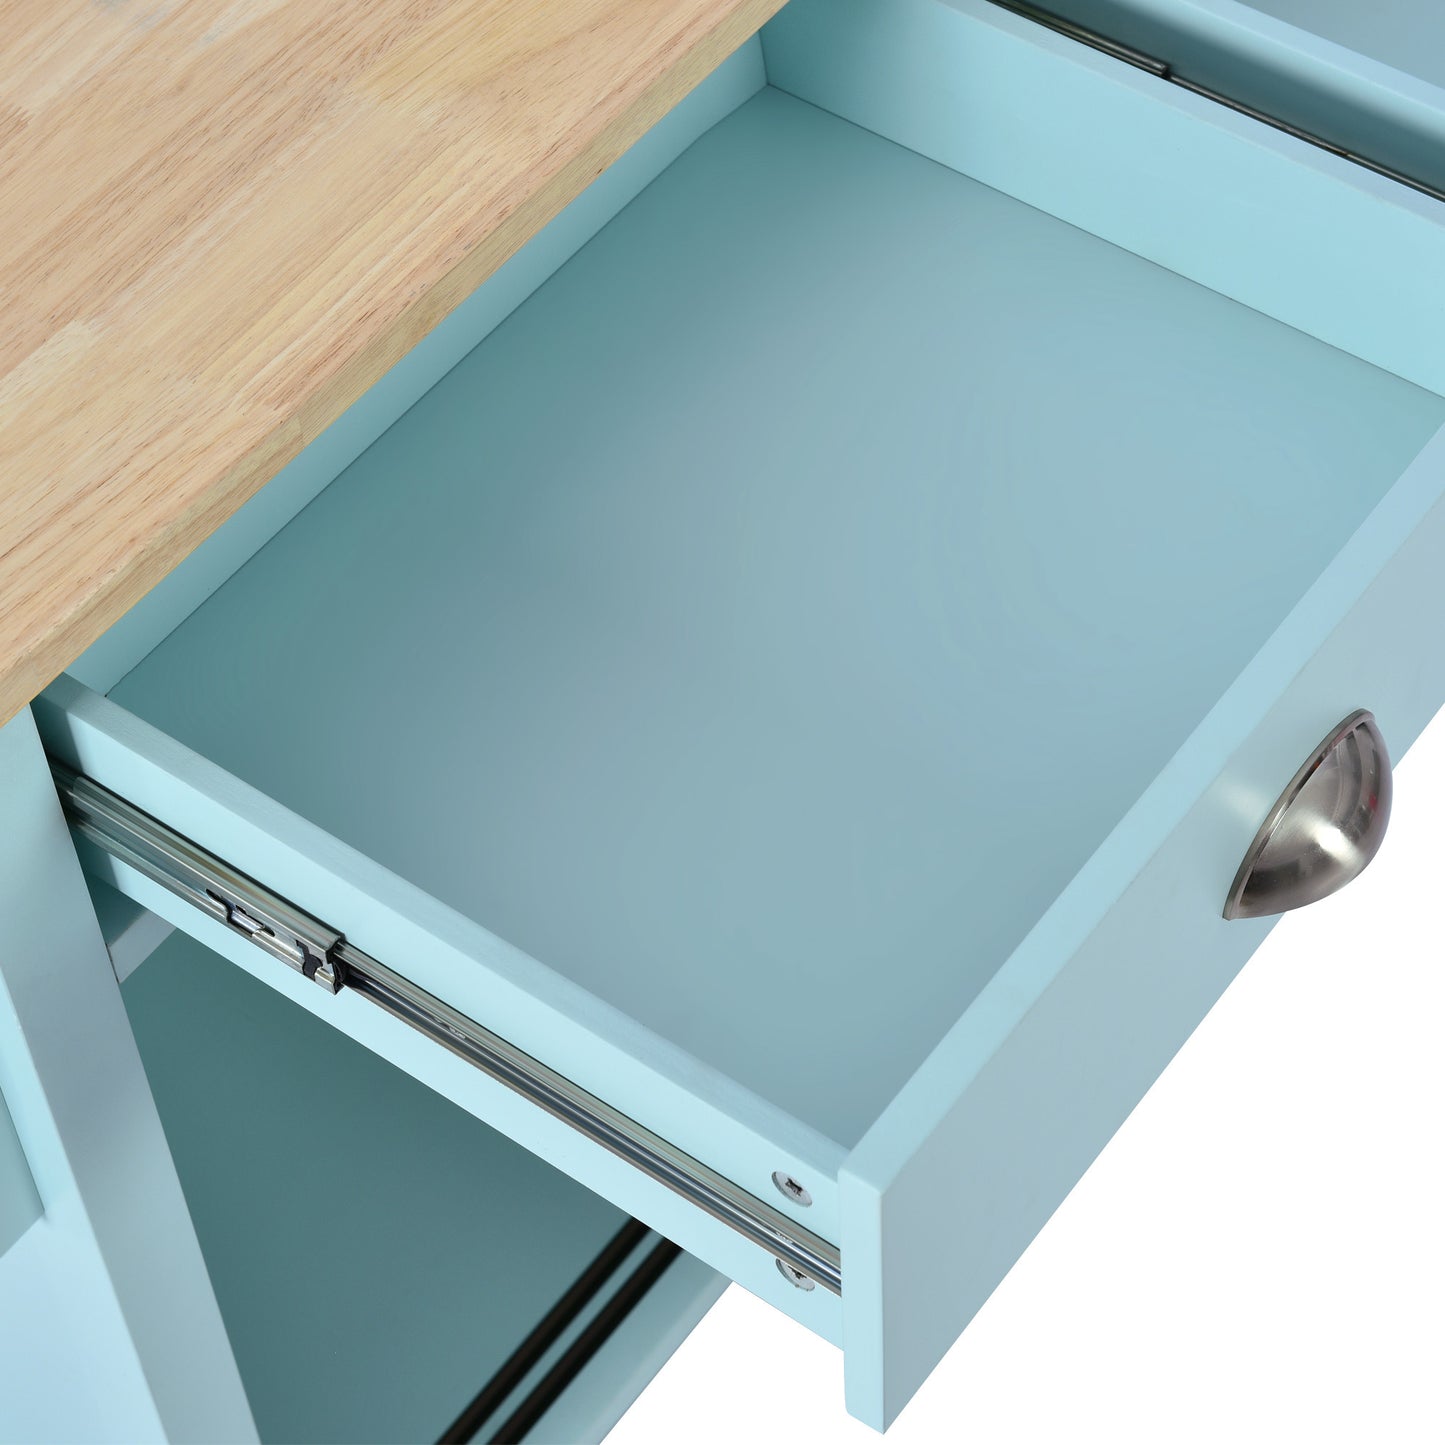 Kitchen Cart with Rubber wood Drop-Leaf Countertop, Concealed sliding barn door adjustable height,Kitchen Island on 4 Wheels with Storage Cabinet and 2 Drawers,L52.2xW30.5xH36.6 inch, Mint Green